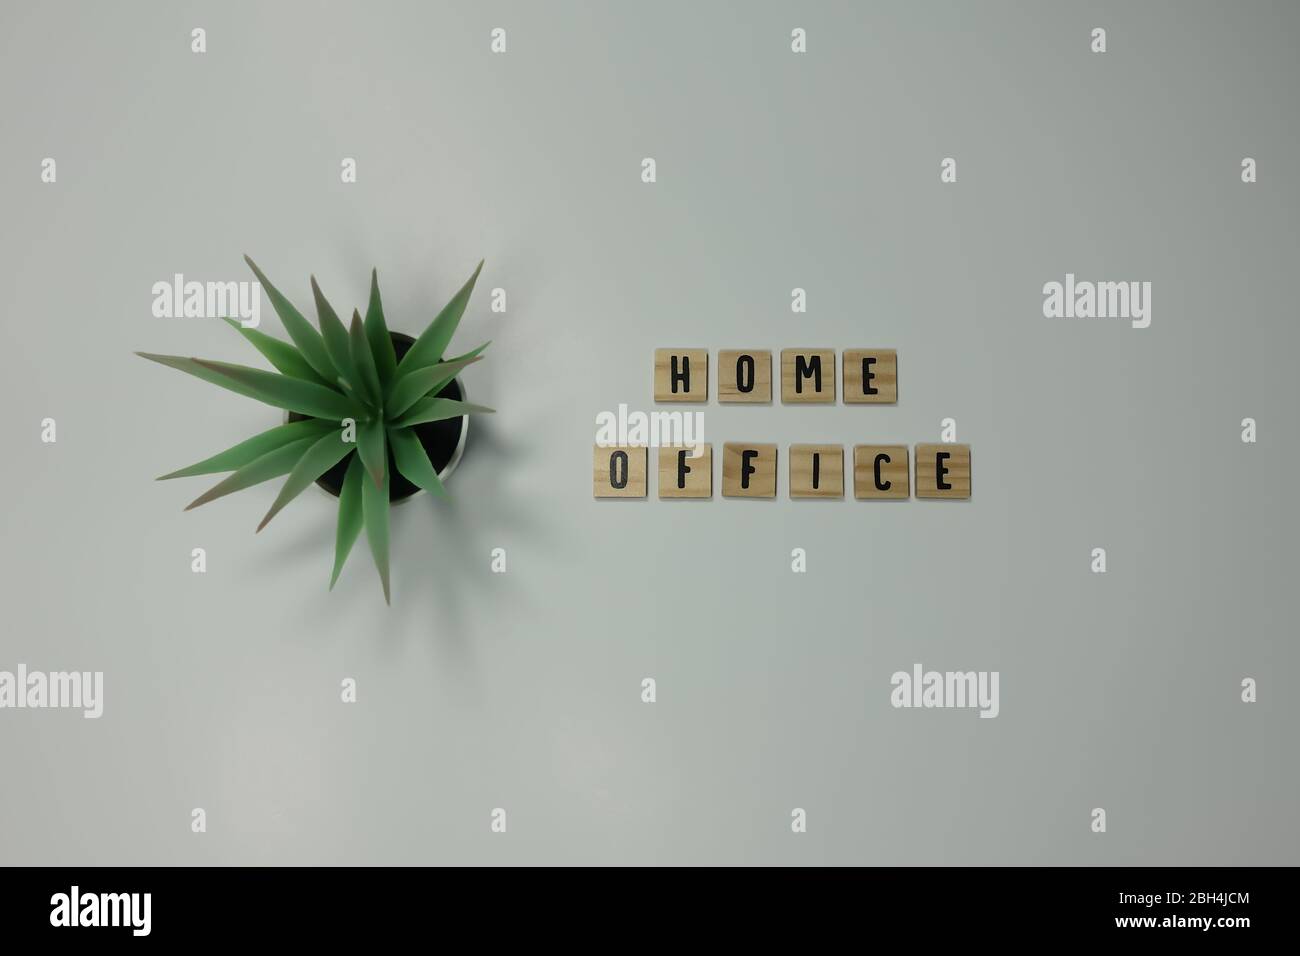 The word home office written in wooden letter tiles on a white background.  Concept work from home, technology, workspace, and lifestyle. Stock Photo